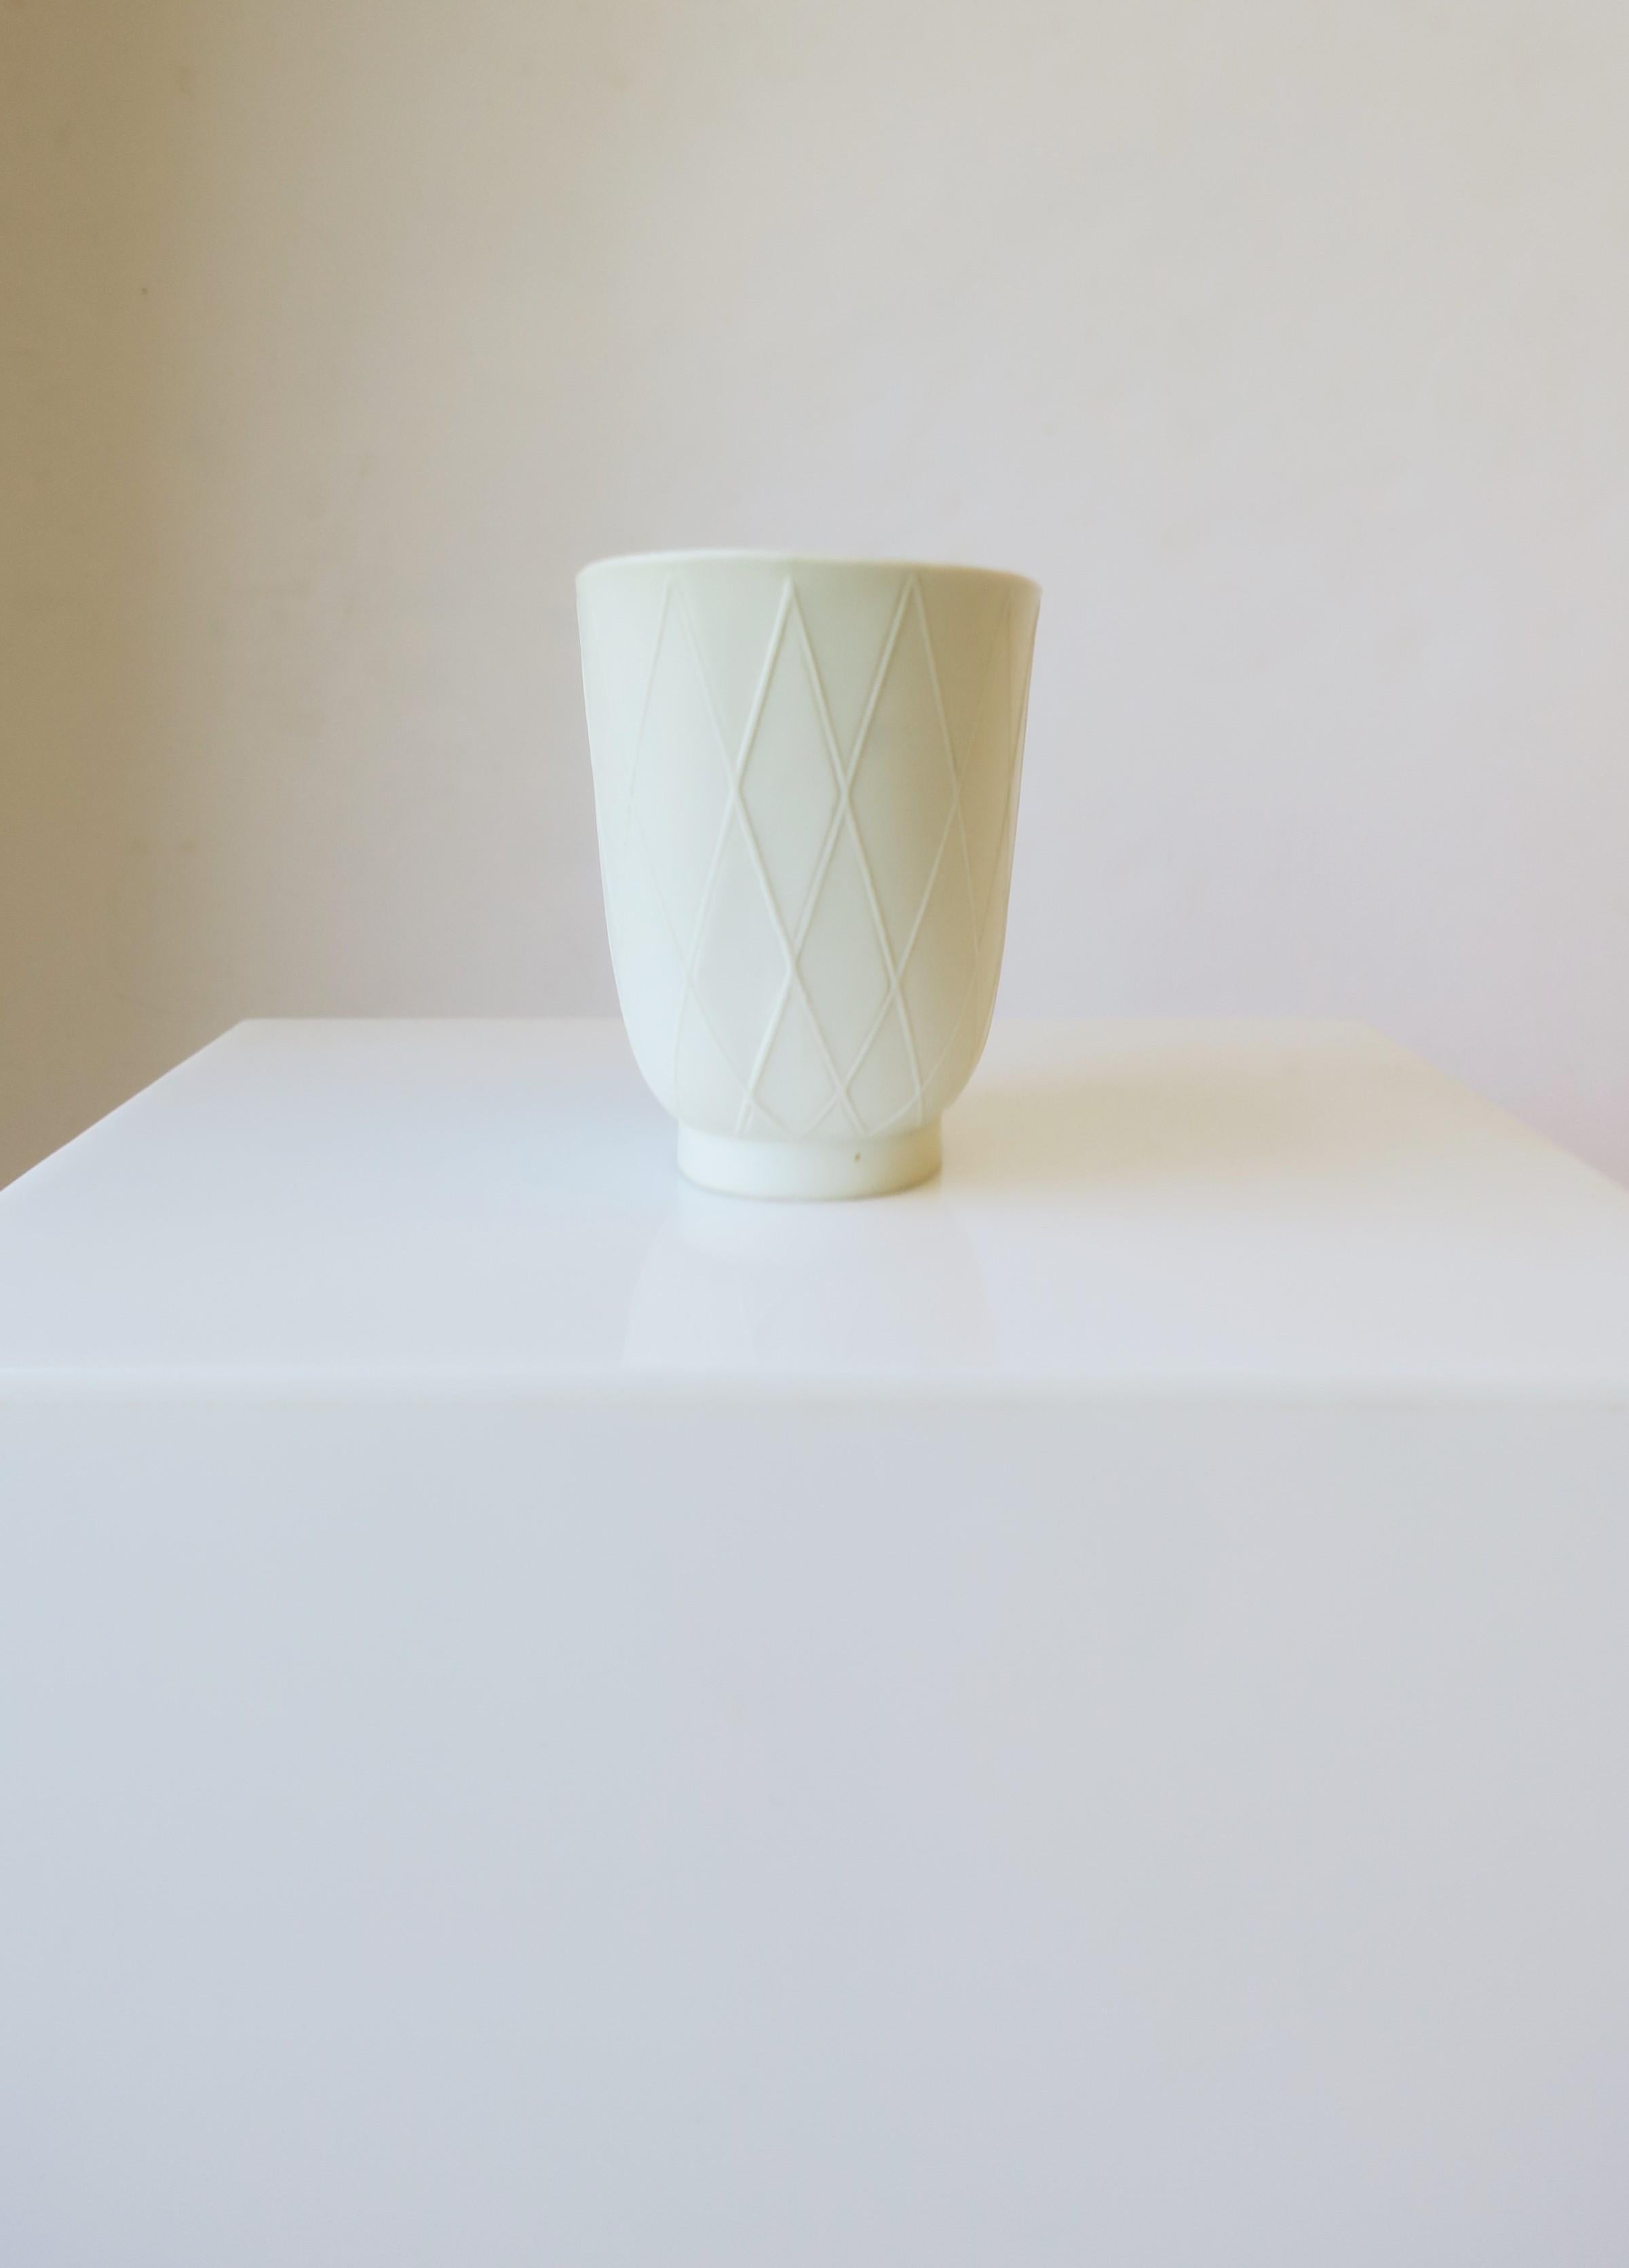 German White Matte Porcelain Vase by Rosenthal, ca. Early 20th C. 8